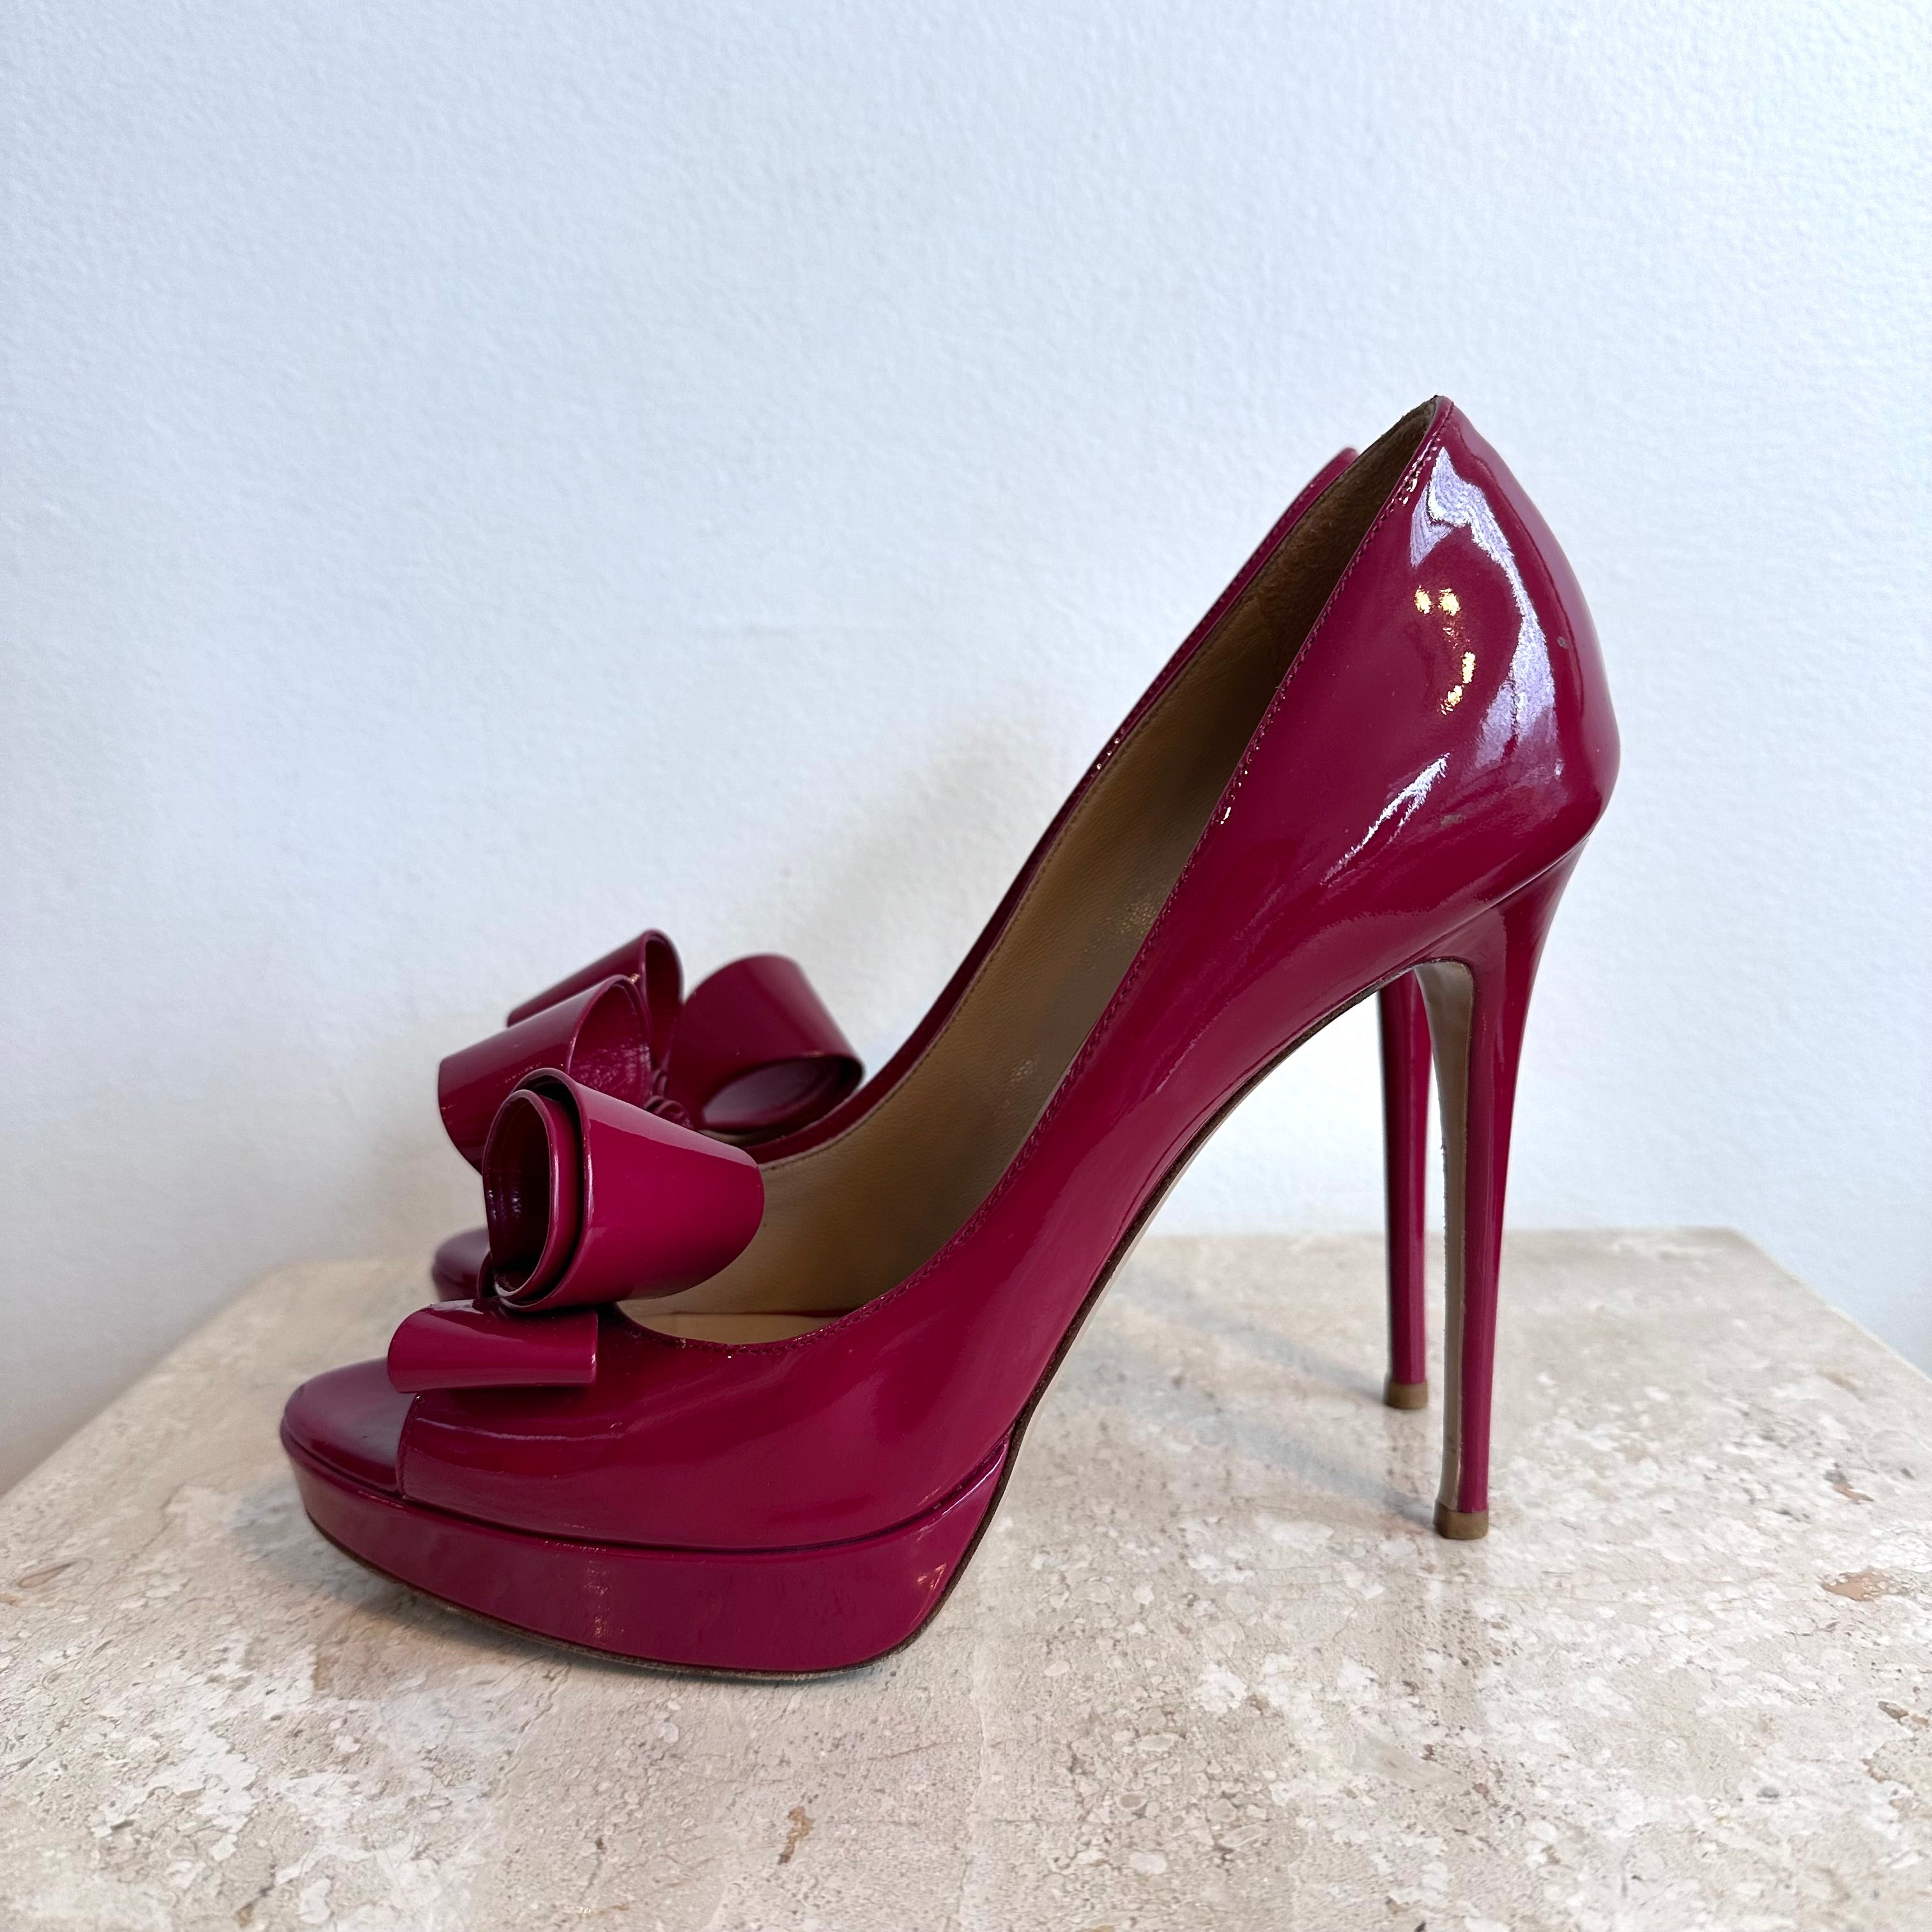 Pre-Owned VALENTINO Size 39 Bow Open Toe Platform Shoes